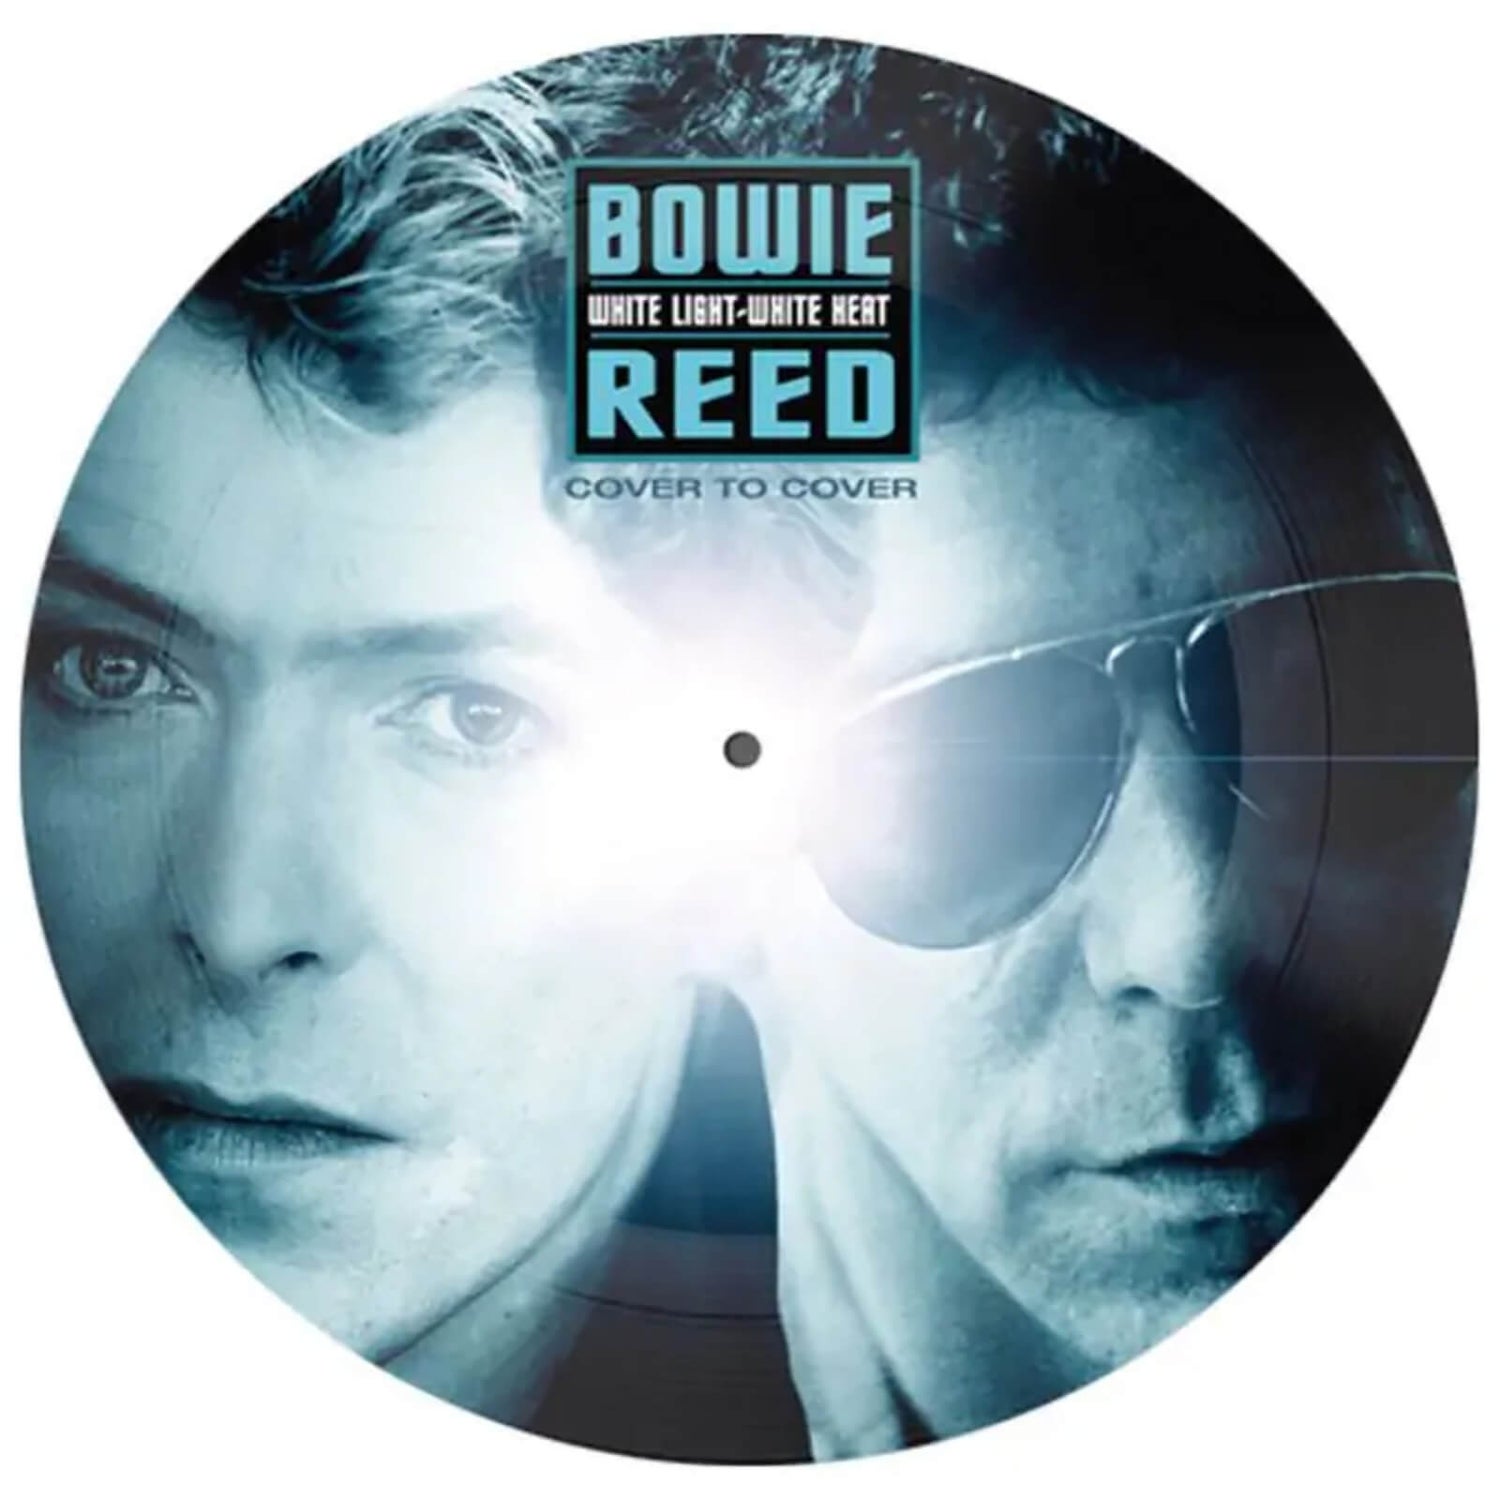 David Bowie / Lou Reed - White Light White Heat (Picture Disc) 7"